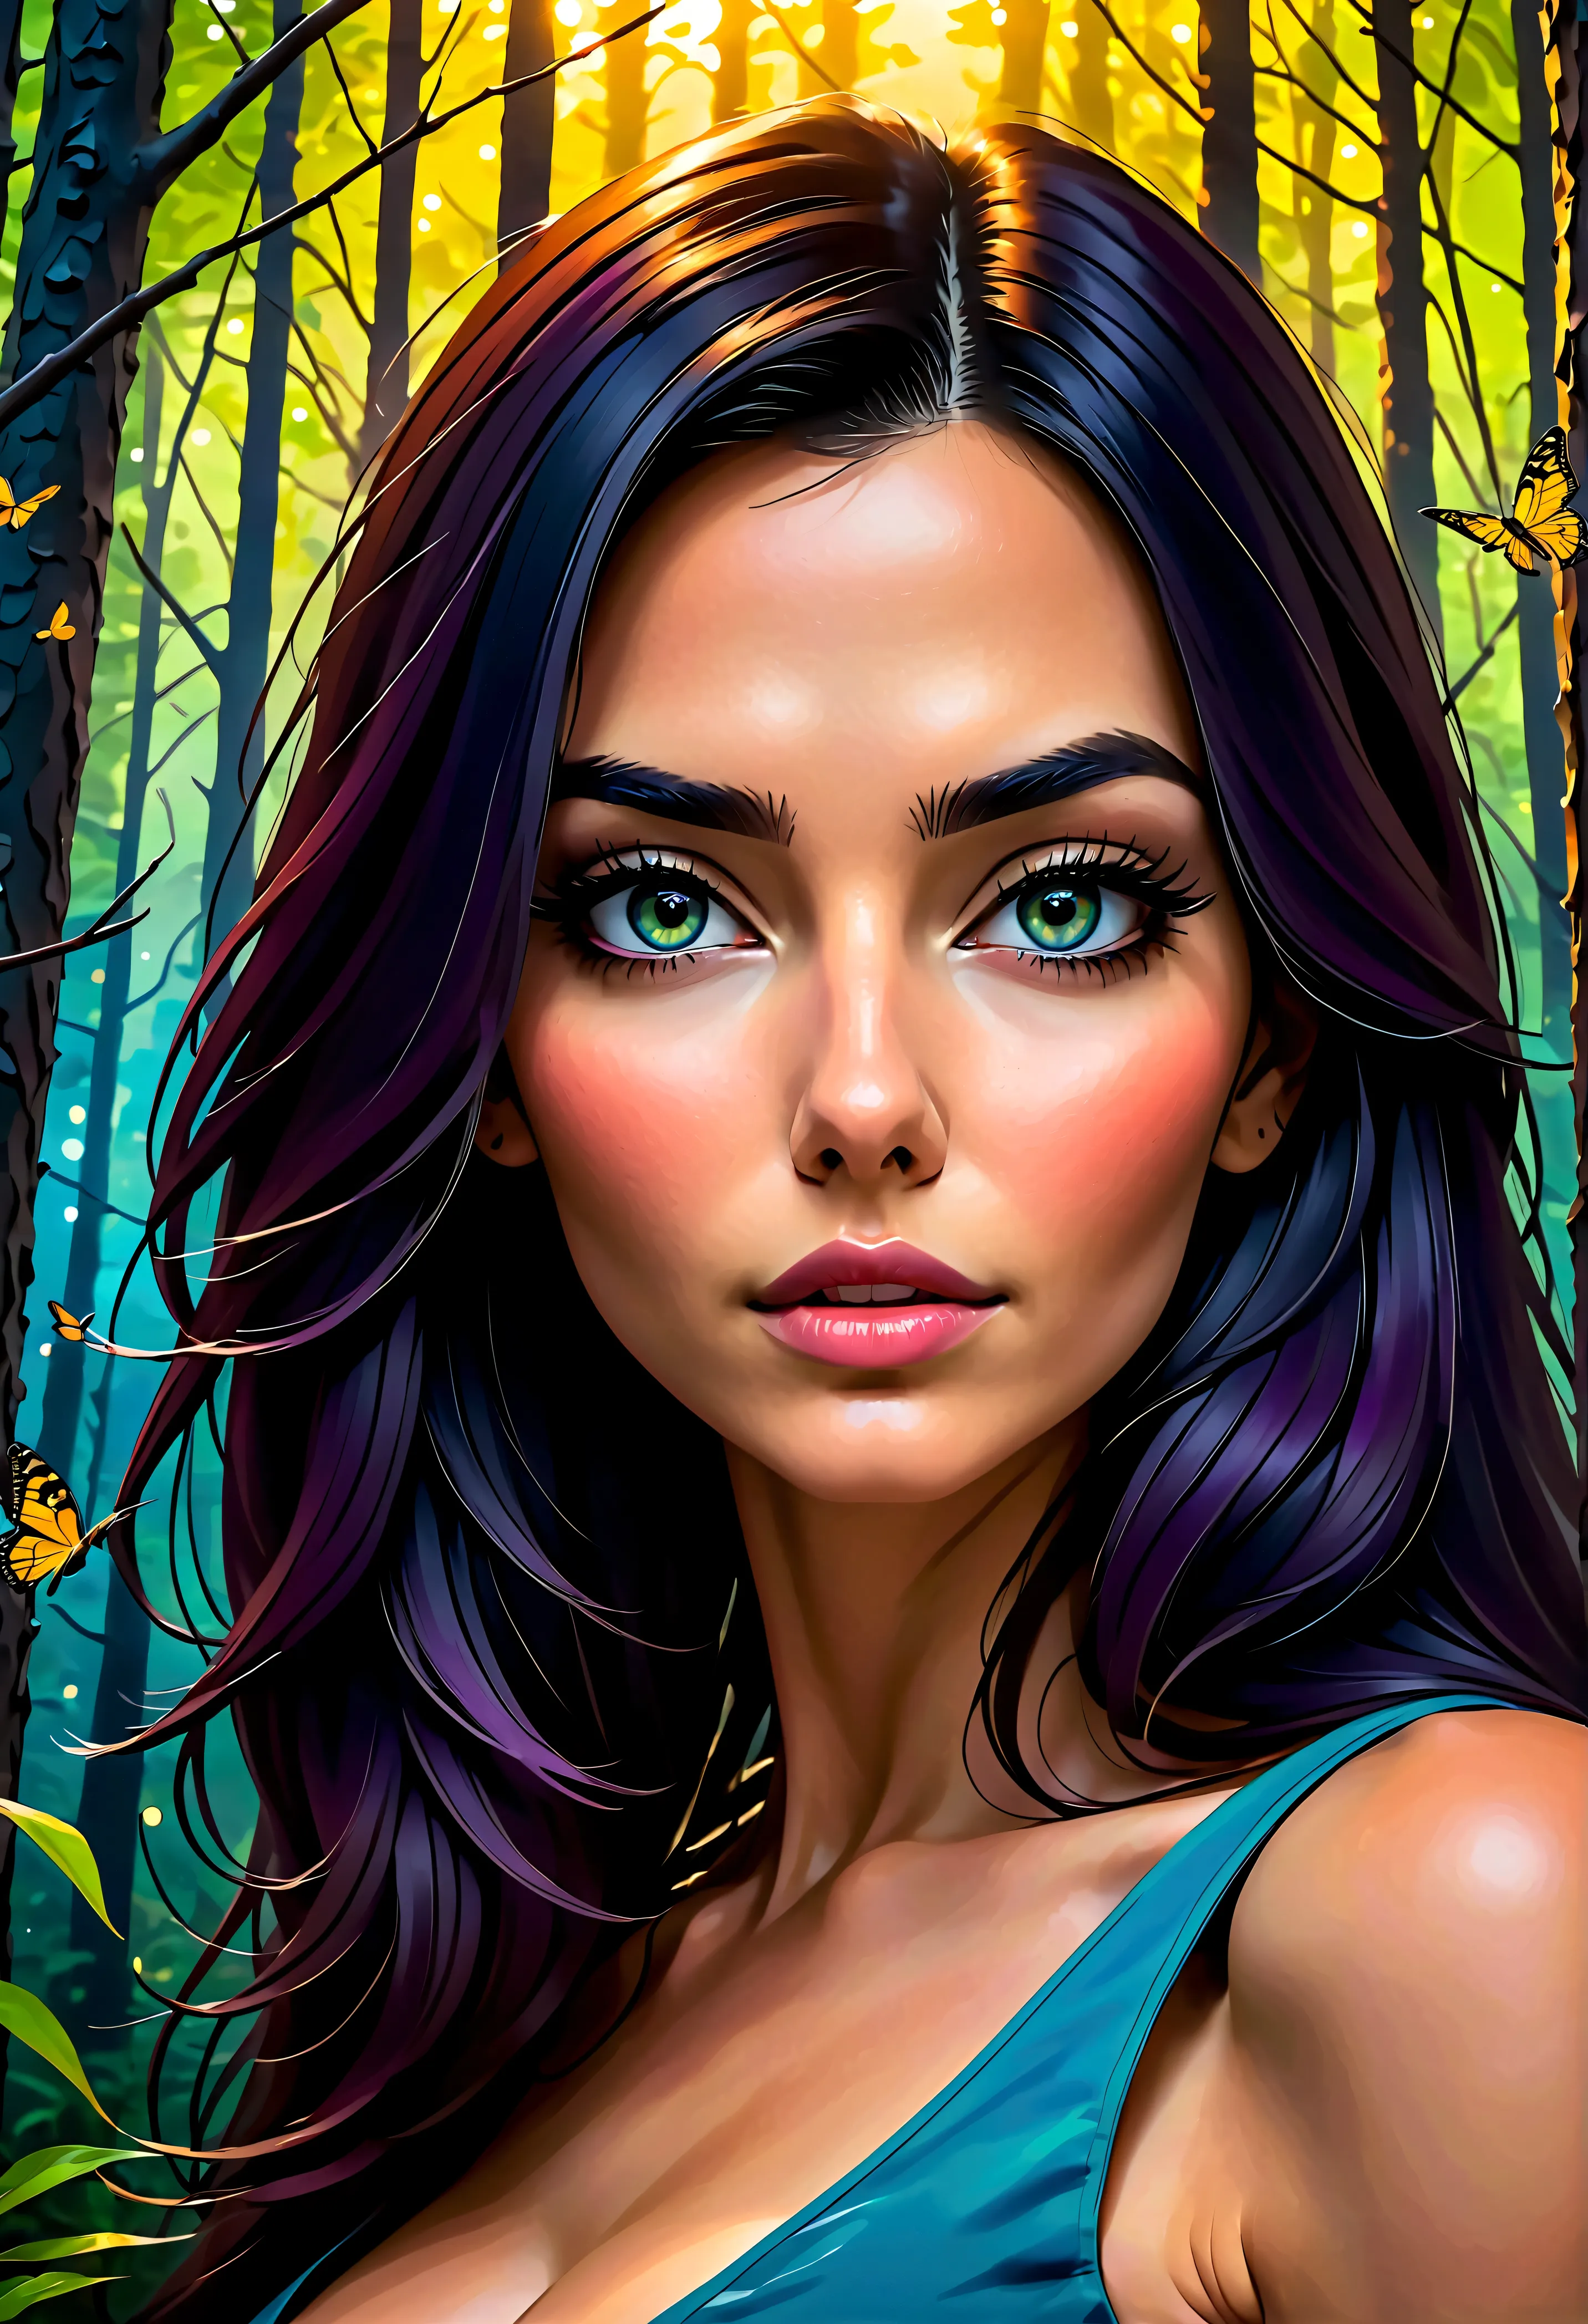 A captivating abstract portrait of a woman's face that artfully blends her features with a nighttime forest landscape filled wit...